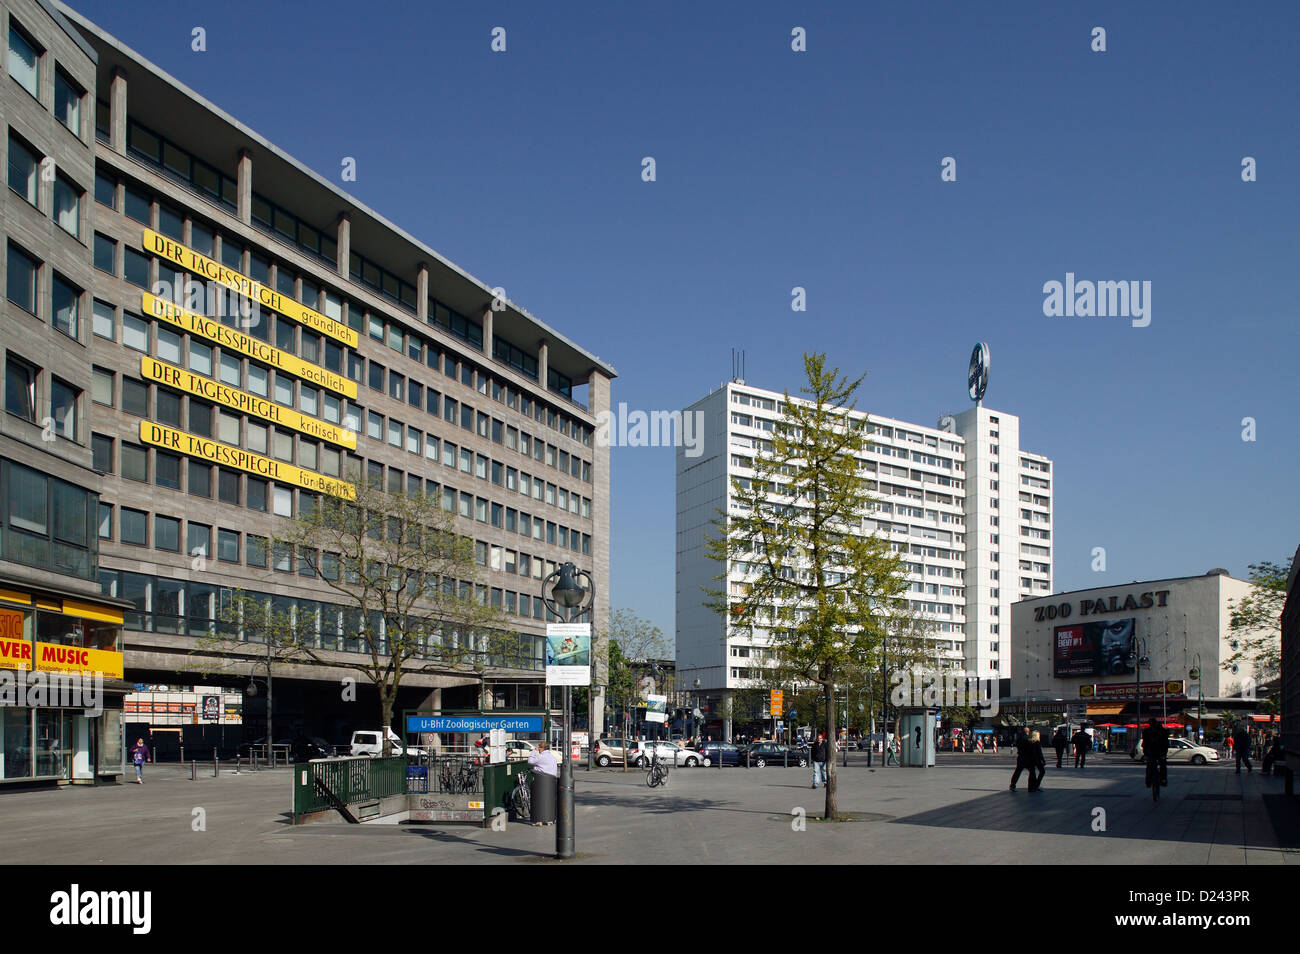 Berlin, Germany, Schimmelpfeng Building and Zoo Palast cinema Stock Photo